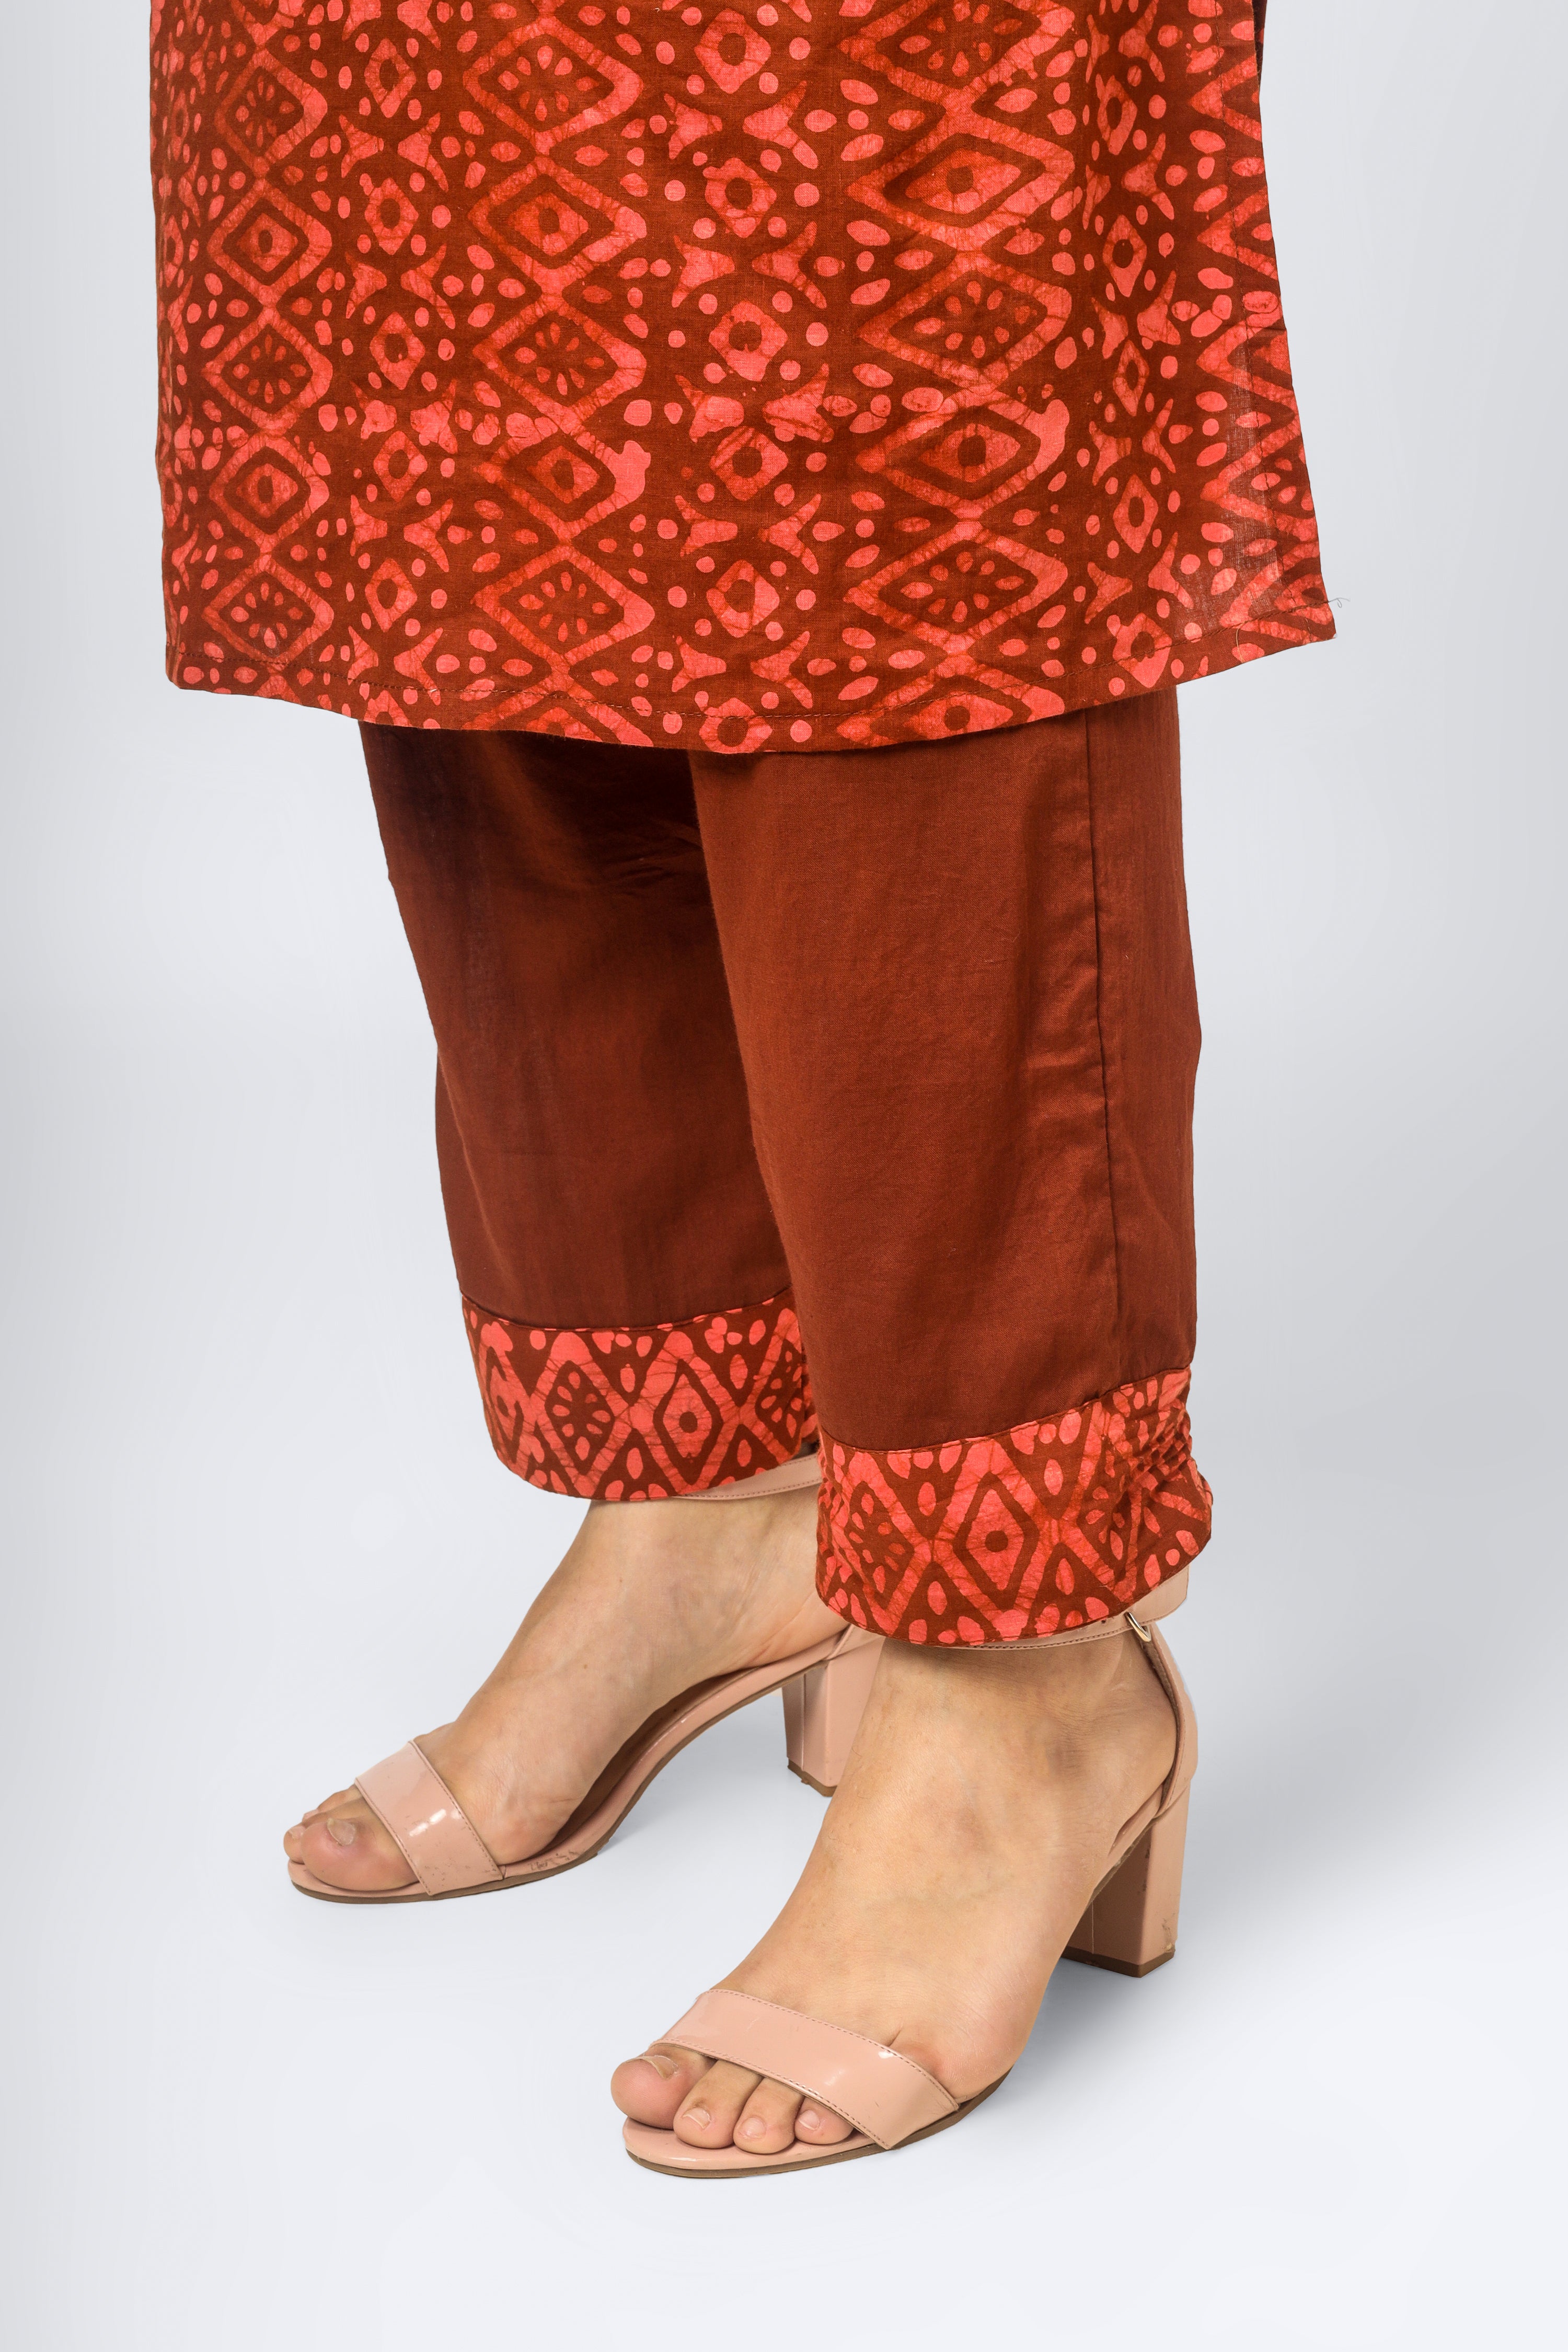 Rayon Aksha Handcrafted Opulence Fancy Trouser Set at Rs 1470/piece in New  Delhi